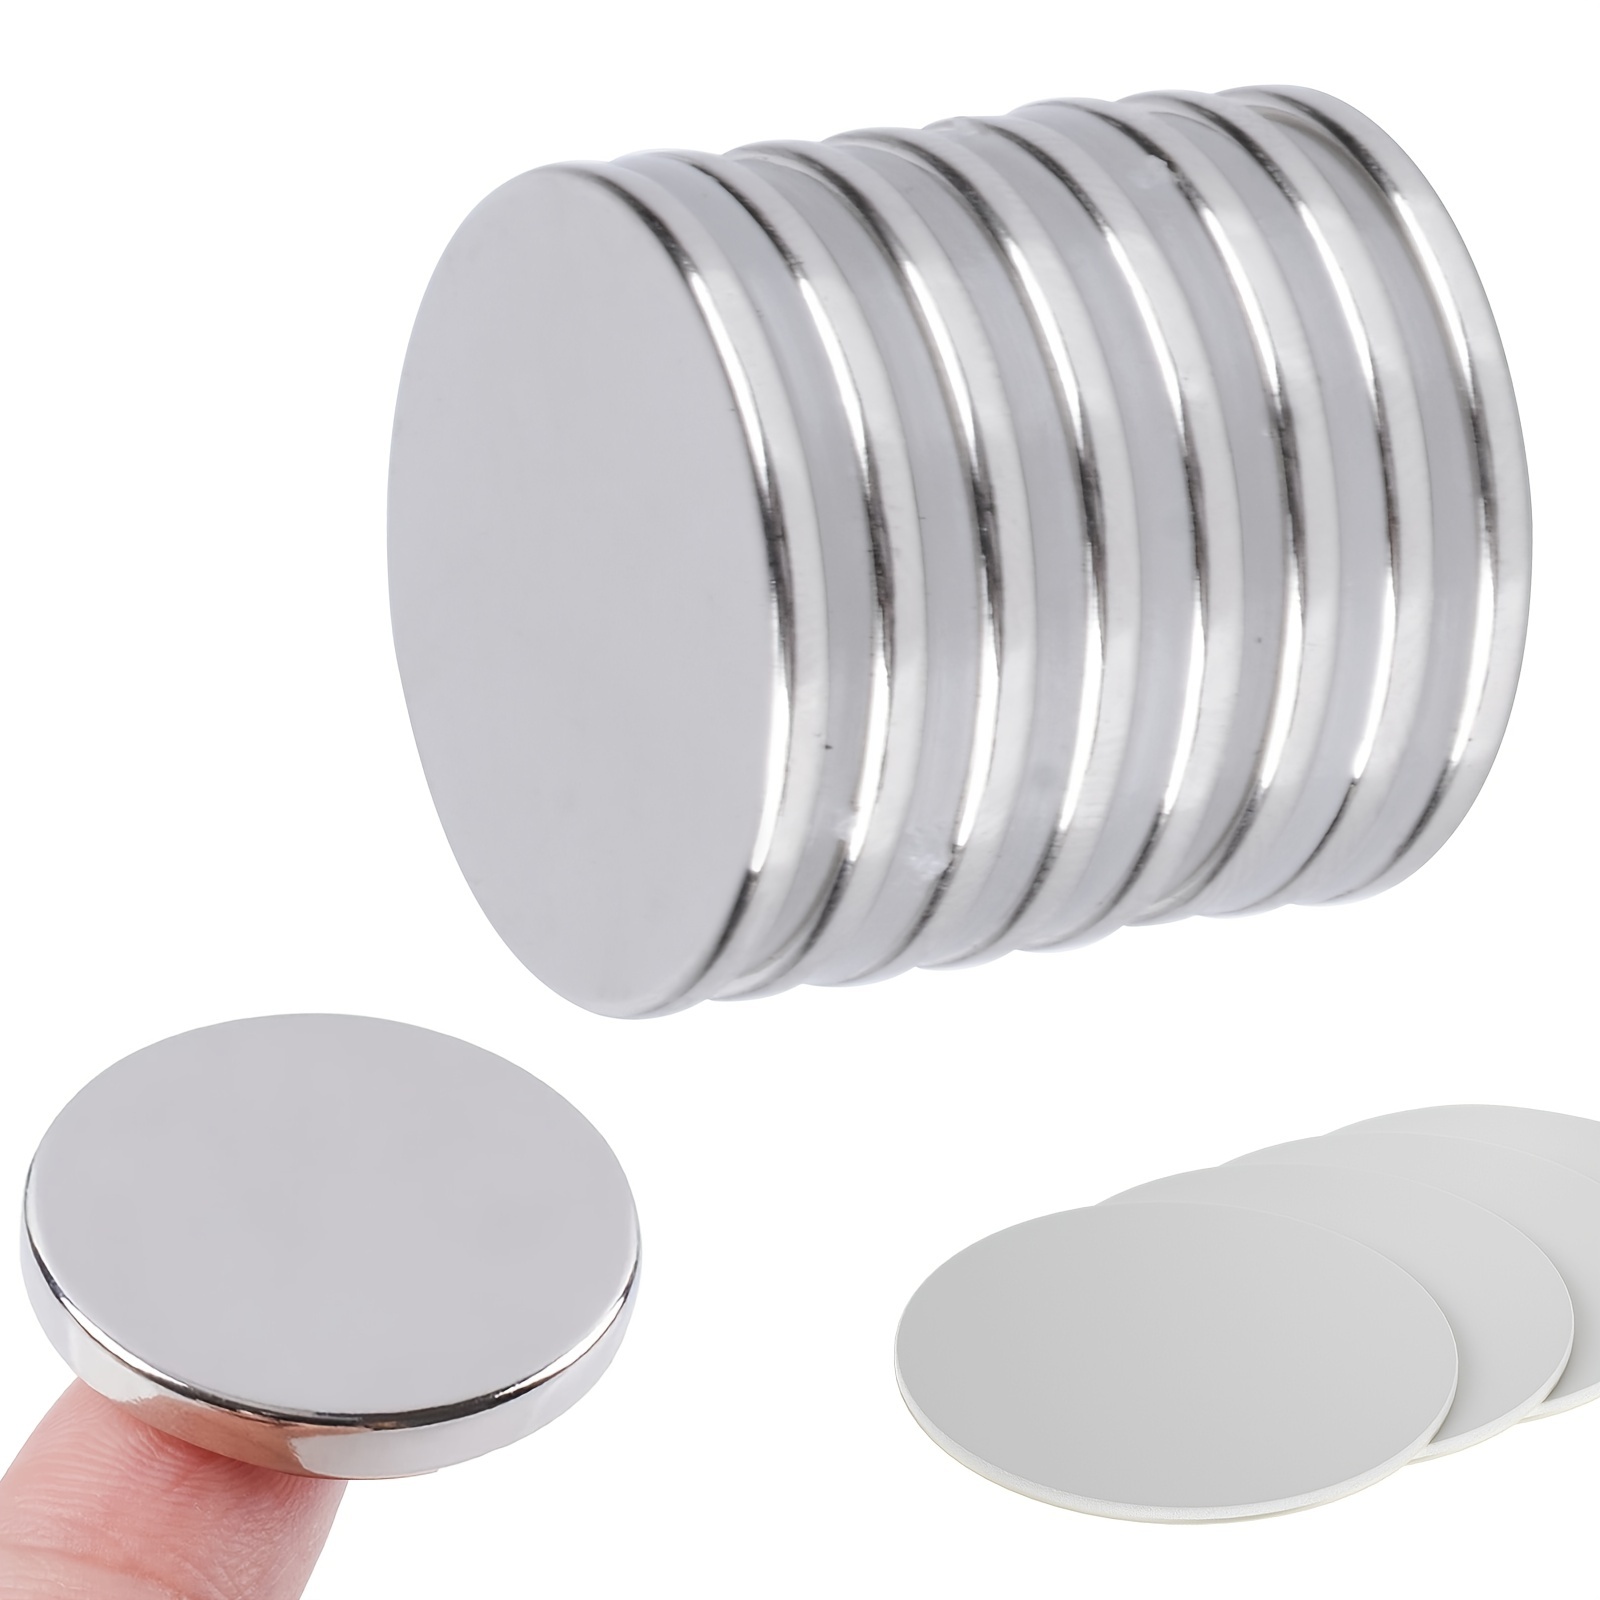 8pcs Strong Neodymium Magnets, Large Round Rare Earth Magnets Disc With  Double-Sided Adhesive For Fridge, Whiteboard, Scientific, Office Magnets-25  X